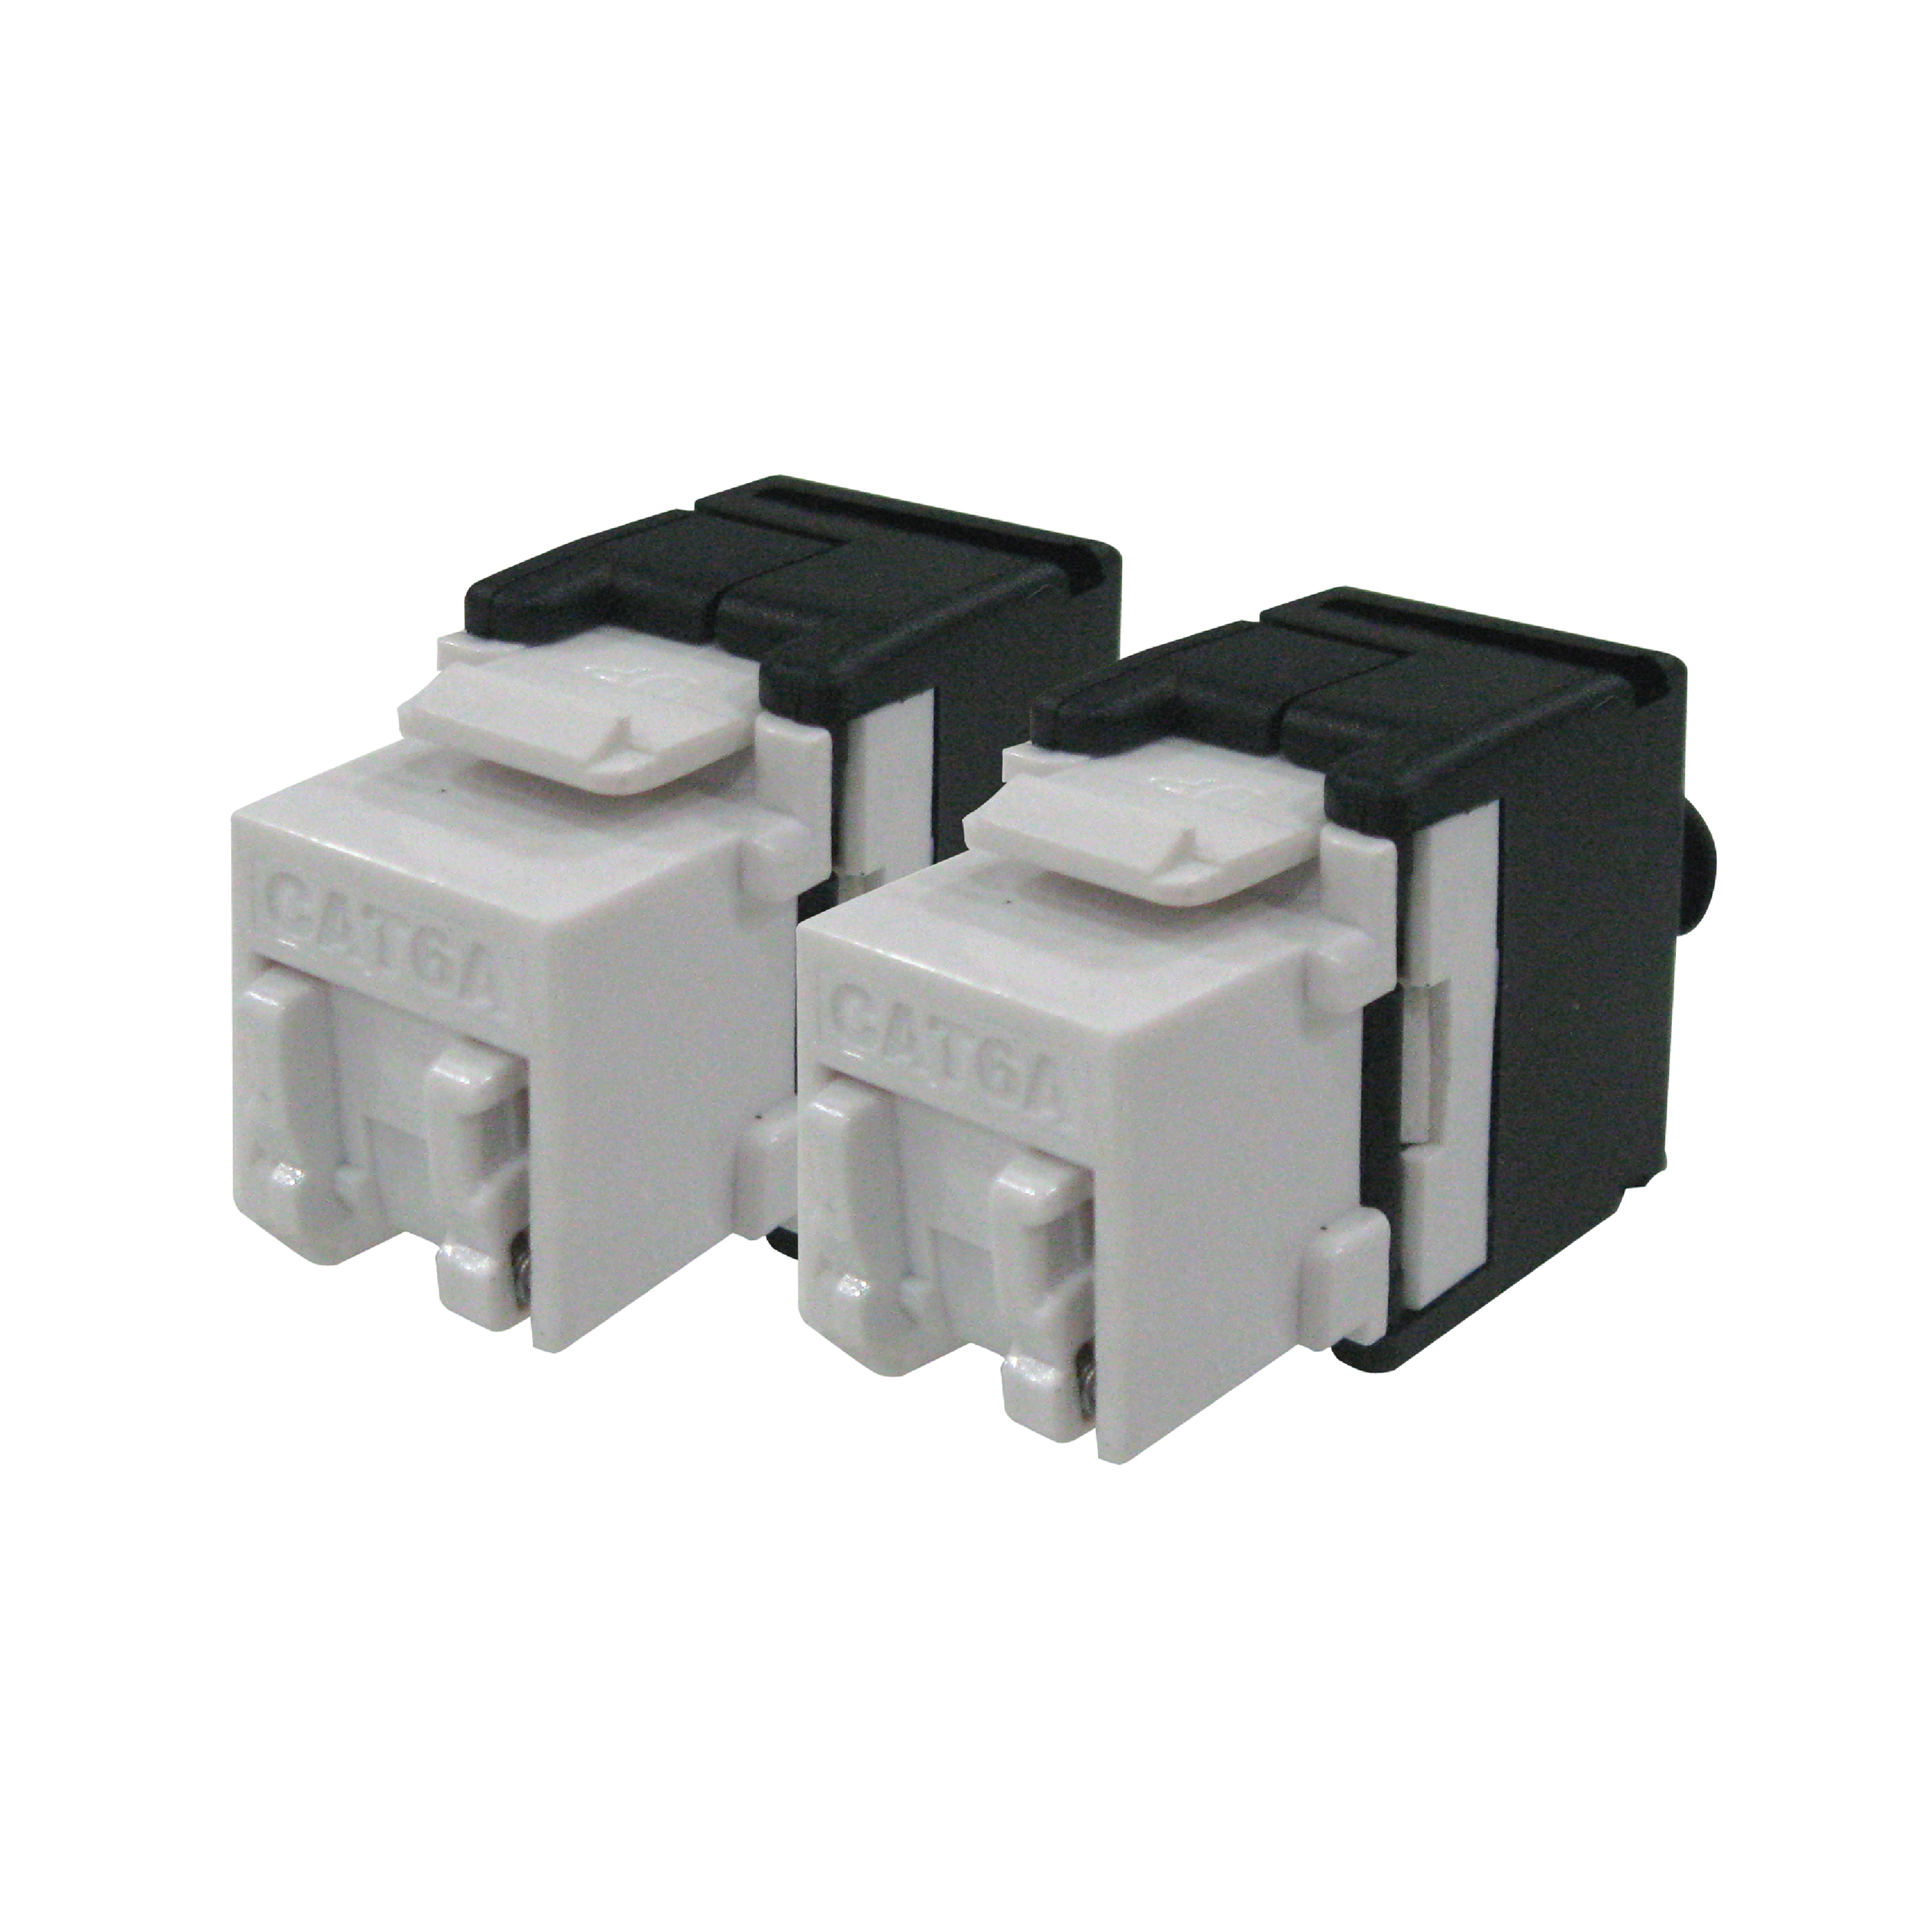 Structured Cabling Picture_RJ45 Modular Jack_Cat 6a Unshielded.jpg